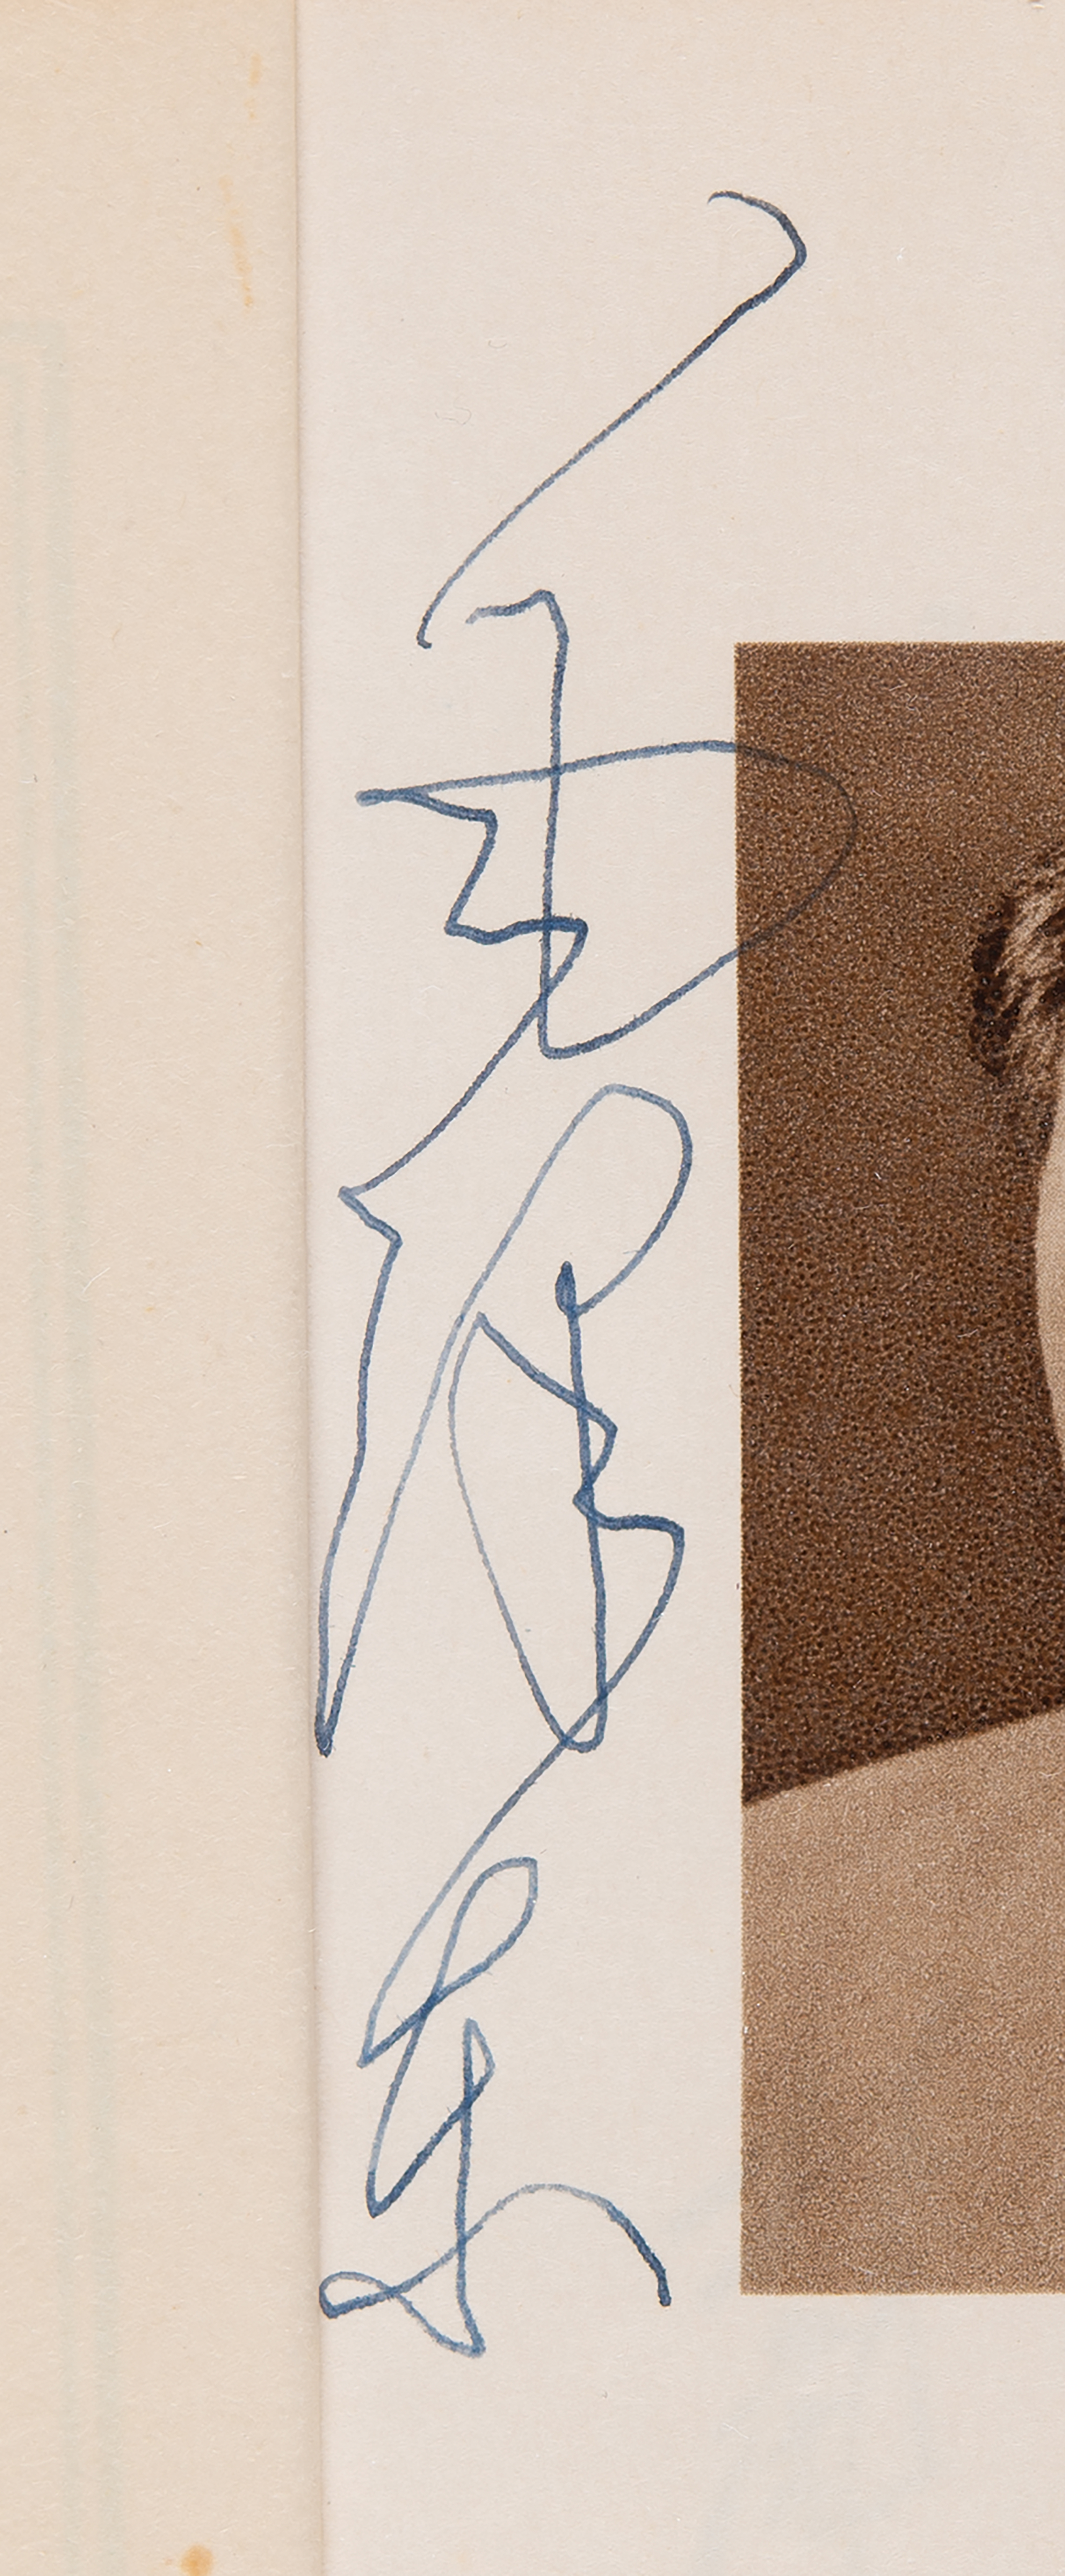 Lot #4023 Mao Zedong Historically Important Signed Book: Quotations from Chairman Mao (The Little Red Book) - Autographed for the Wife of Pakistan's Foreign Minister, with Photo Proof - Image 3